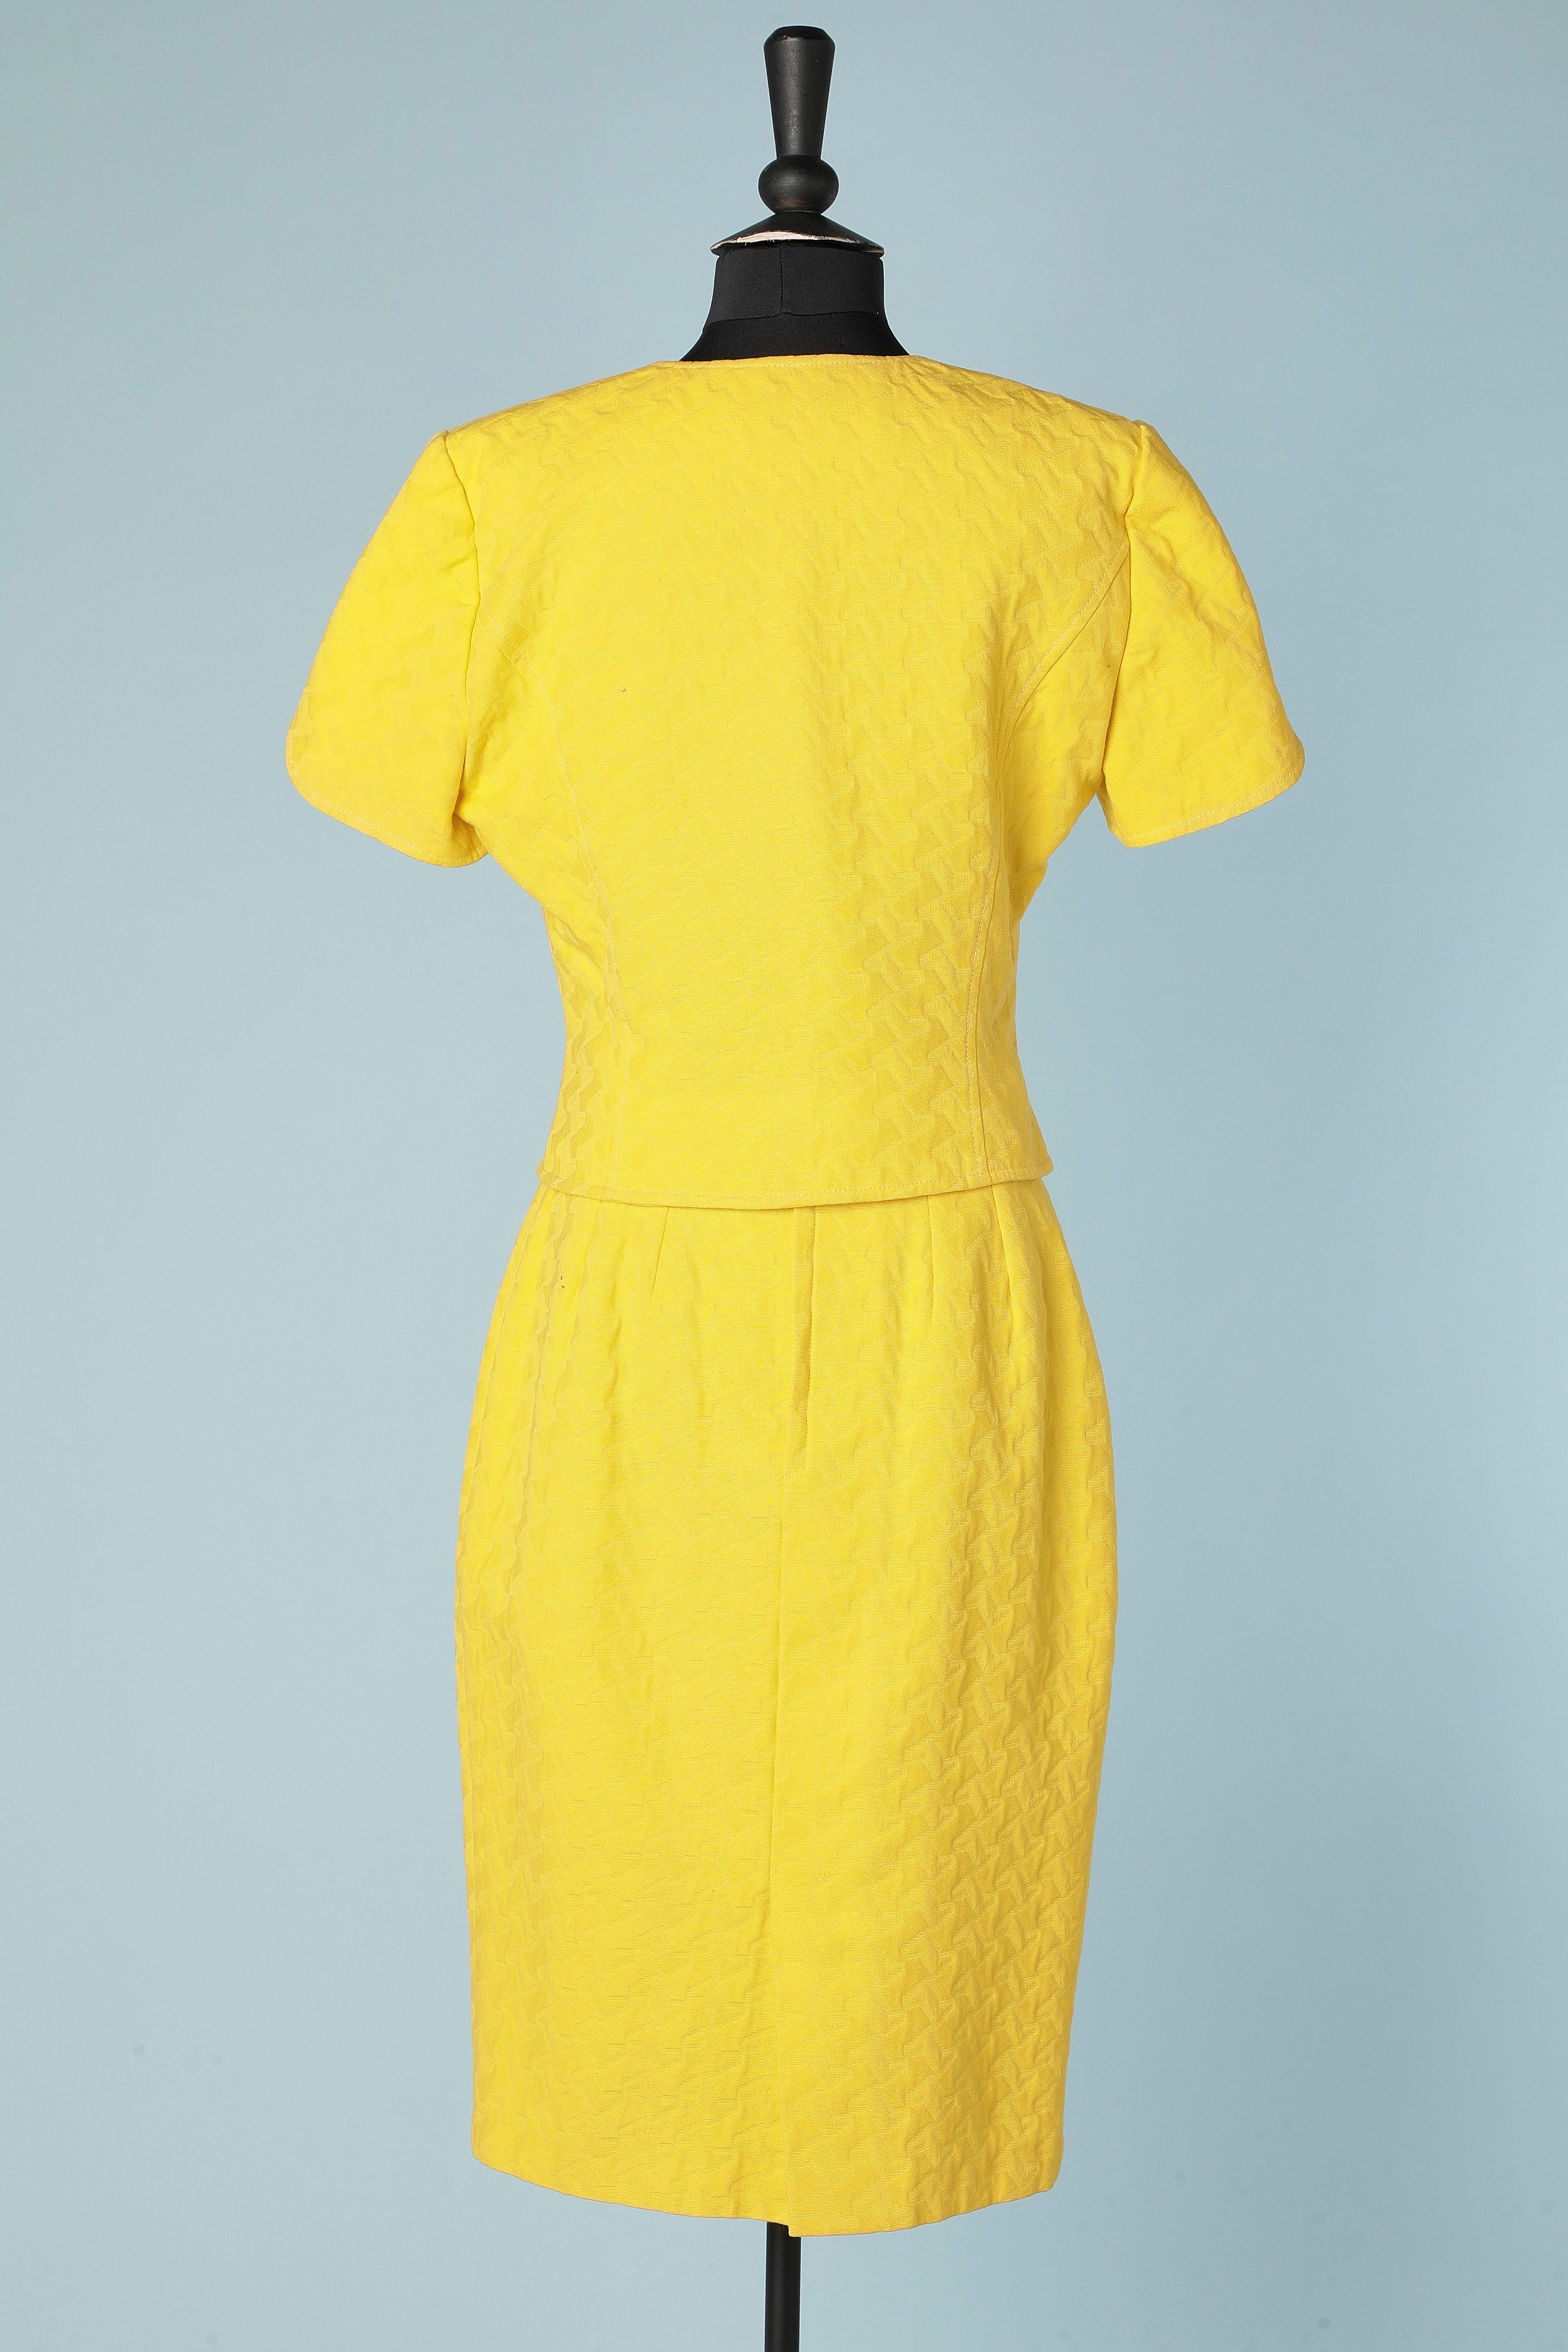 Yellow cotton jacquard skirt-suit with gold metal buttons Jacques Heim  For Sale 3